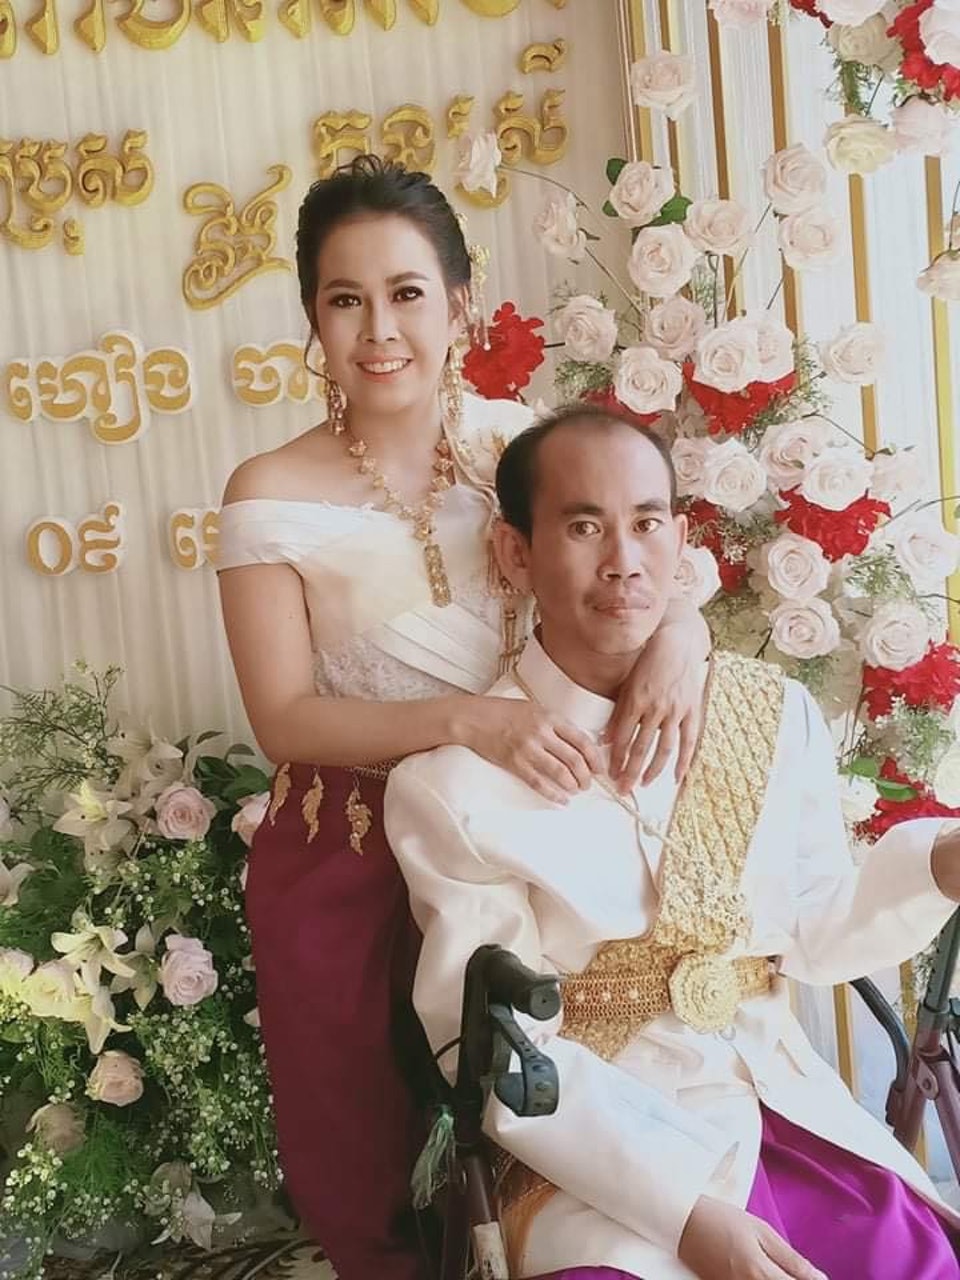 This Cambodian Groom Tied The Knot With His Own Sister